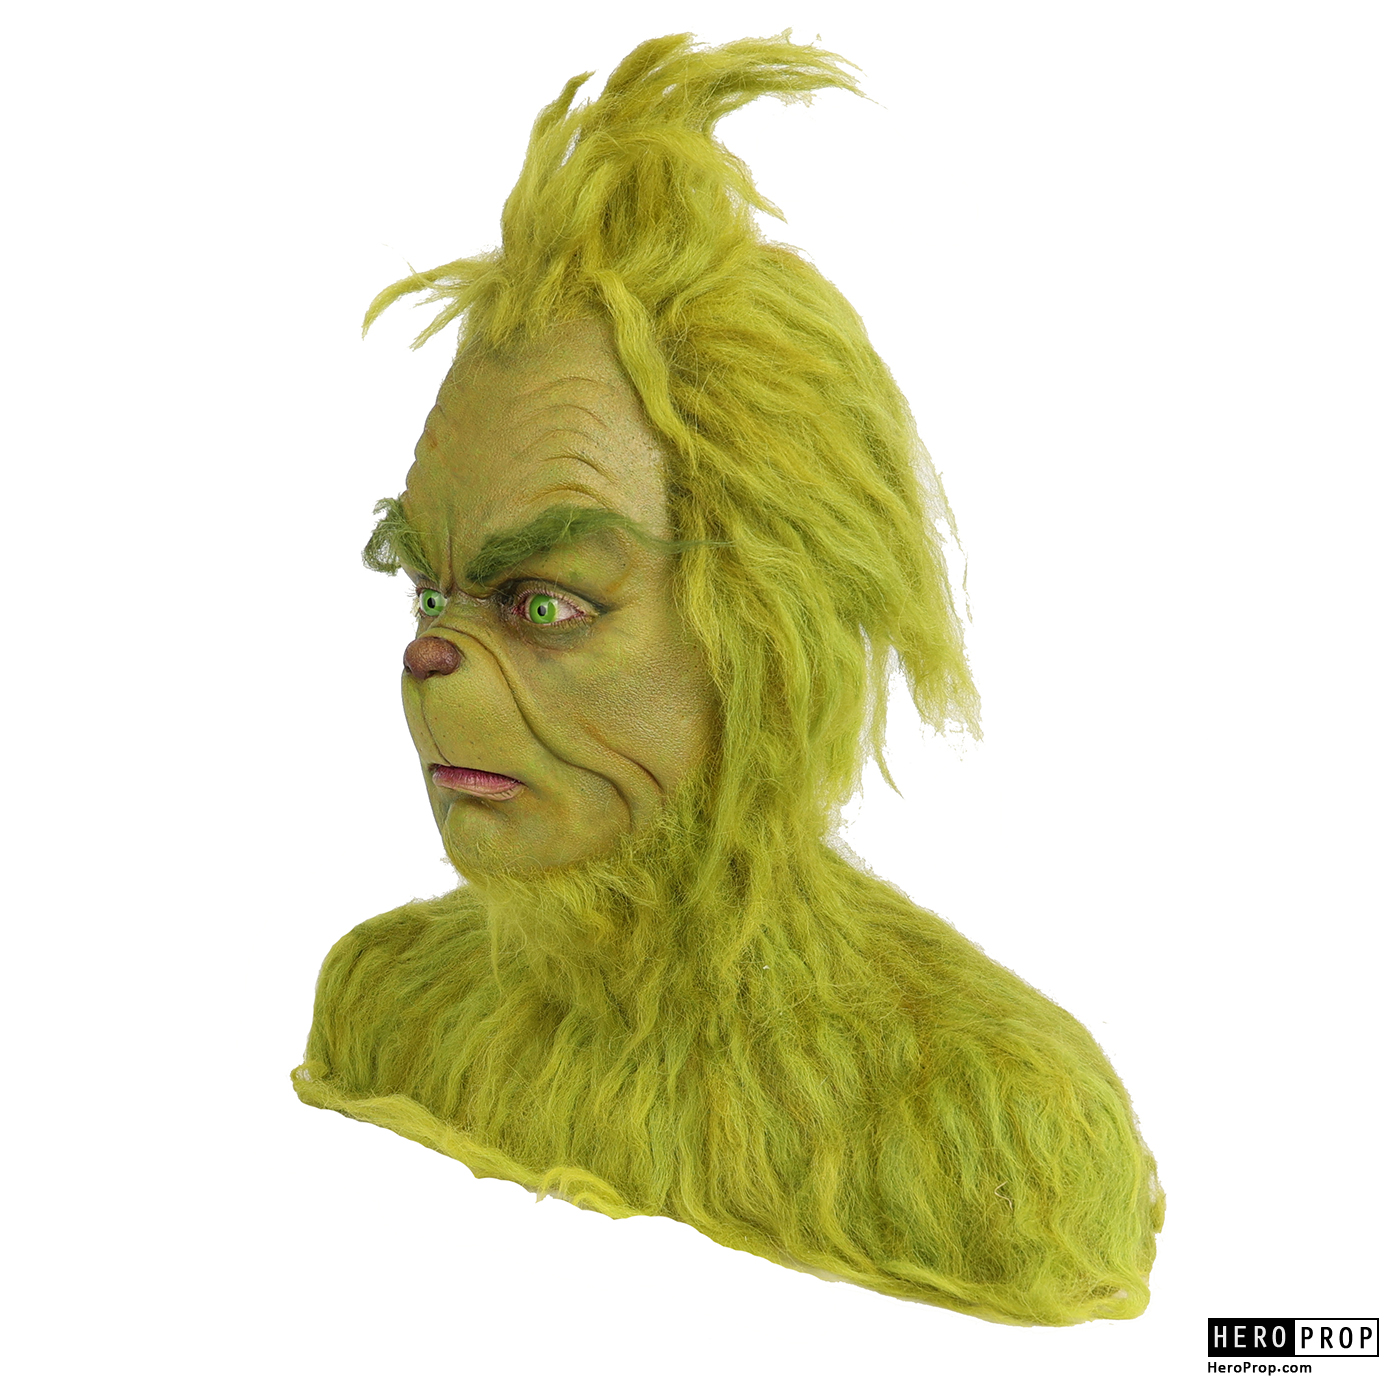 How The Grinch Stole Christmas (2000) - The Grinch Bust - HeroProp.com